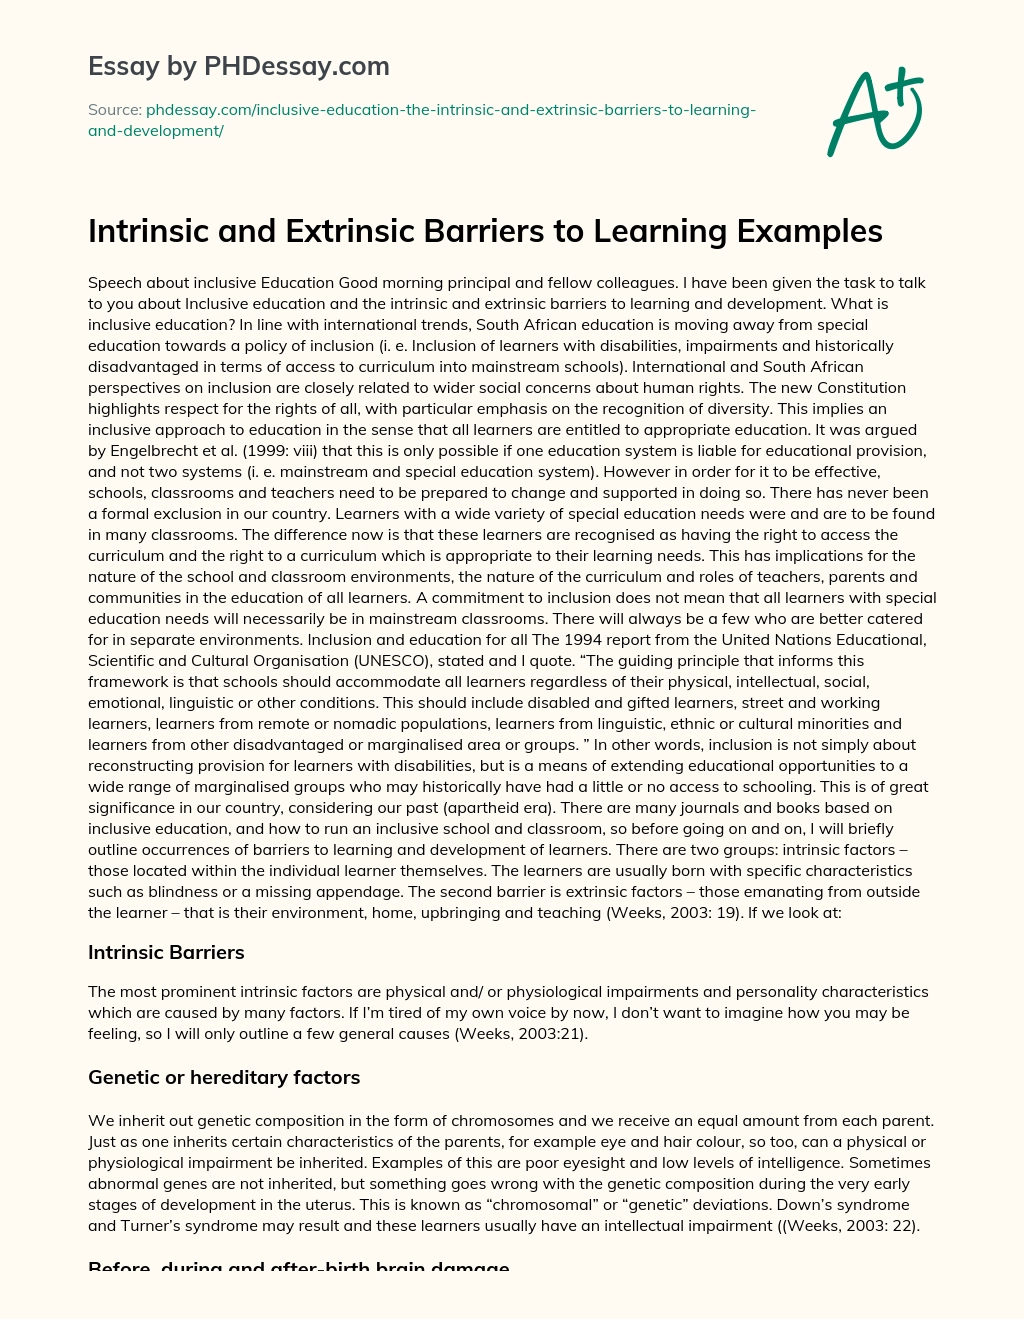 Intrinsic and Extrinsic Barriers to Learning Examples essay